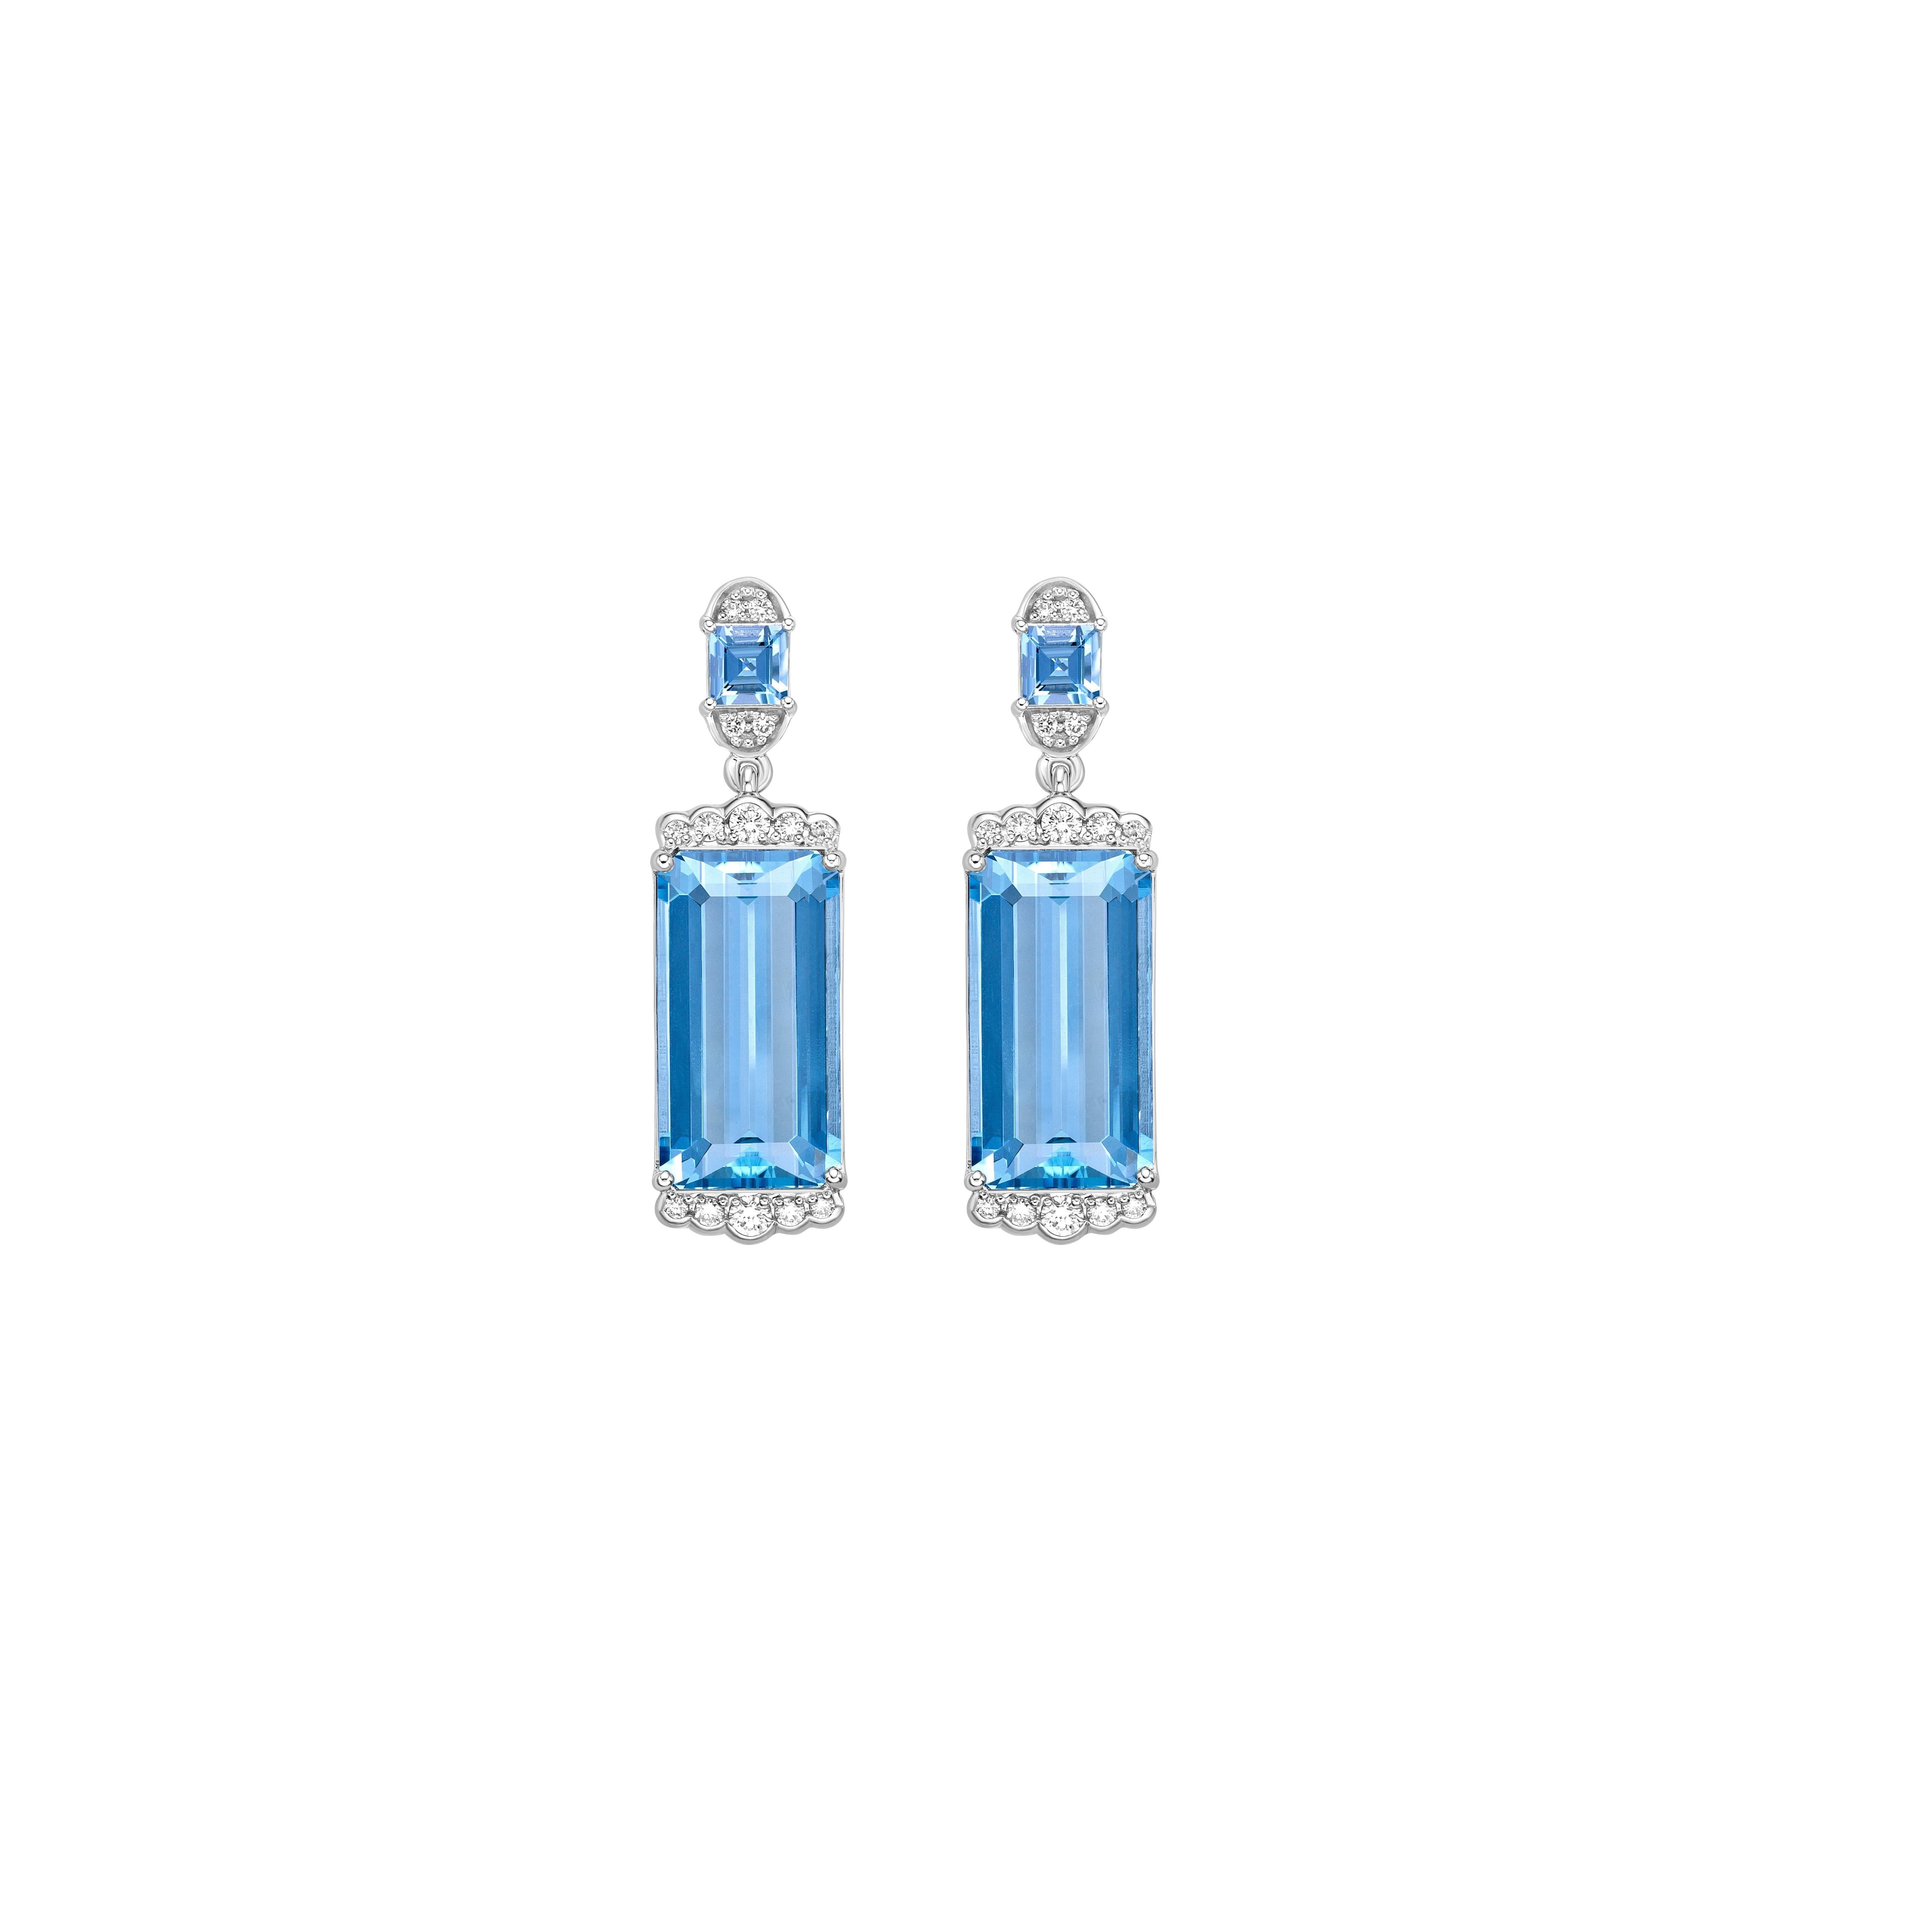 Contemporary 14.03 Carat Aquamarine Drop Earring in 18KWG with White Diamond. For Sale